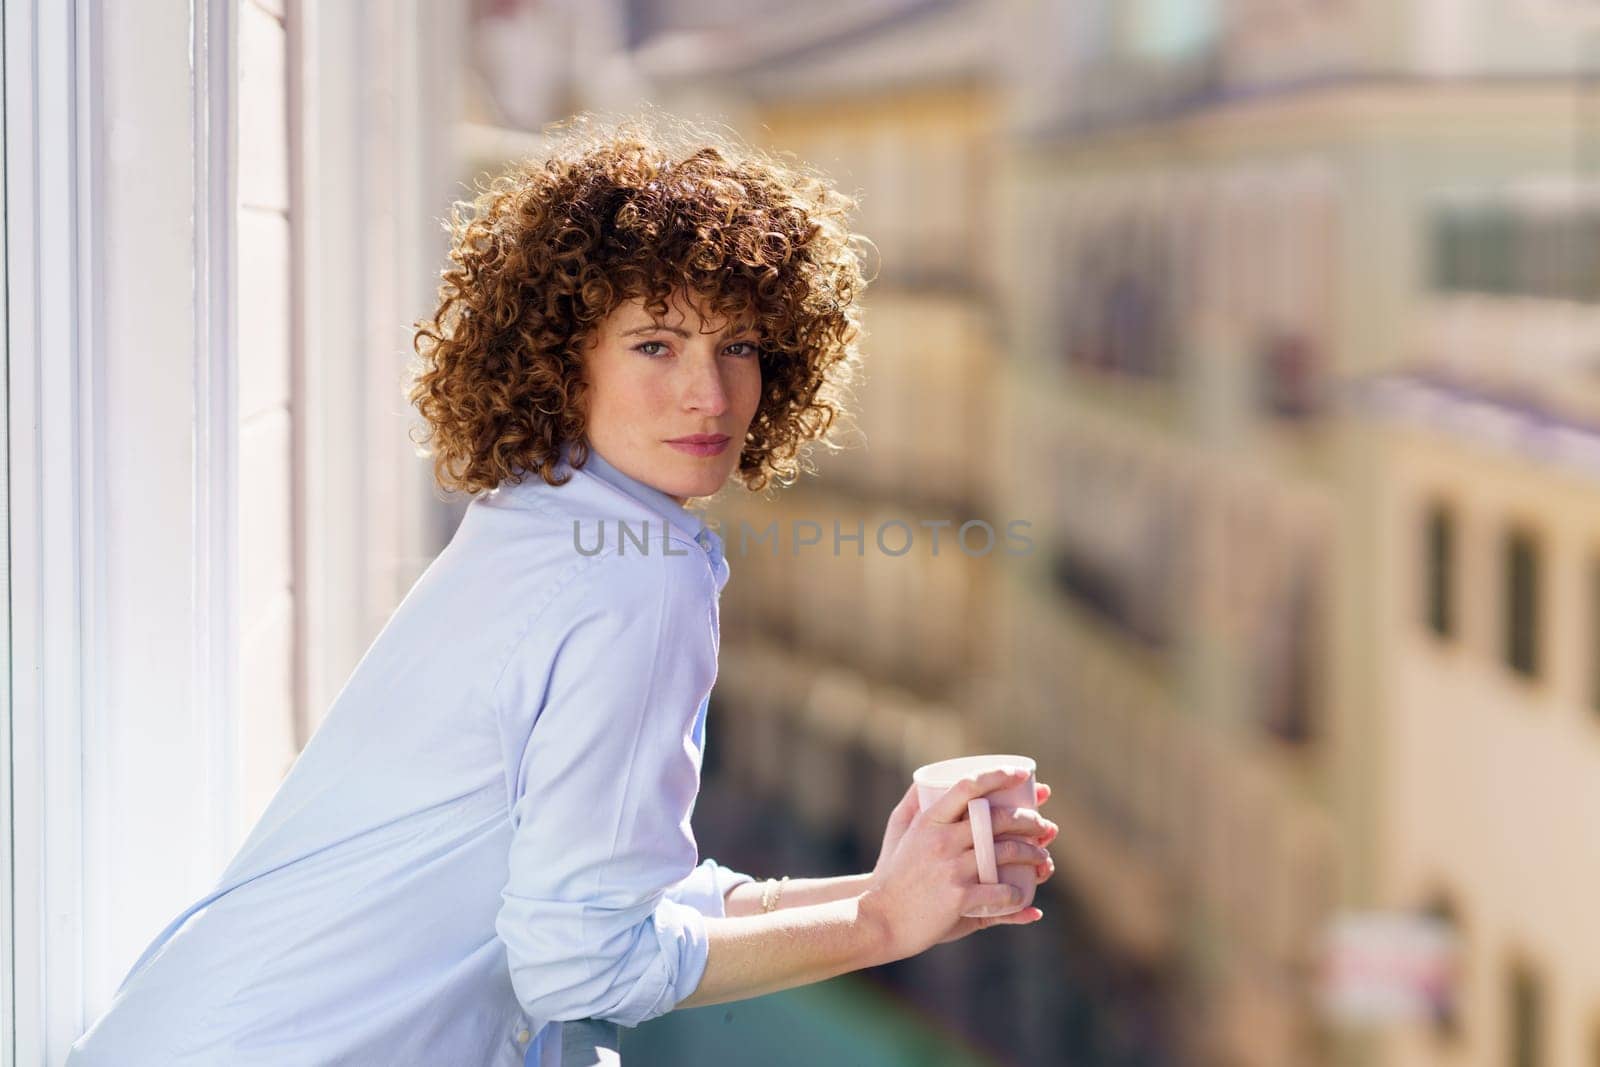 Adult woman with brown curly hair leaning on railing of balcony while enjoying cup of hot beverage against blurred background